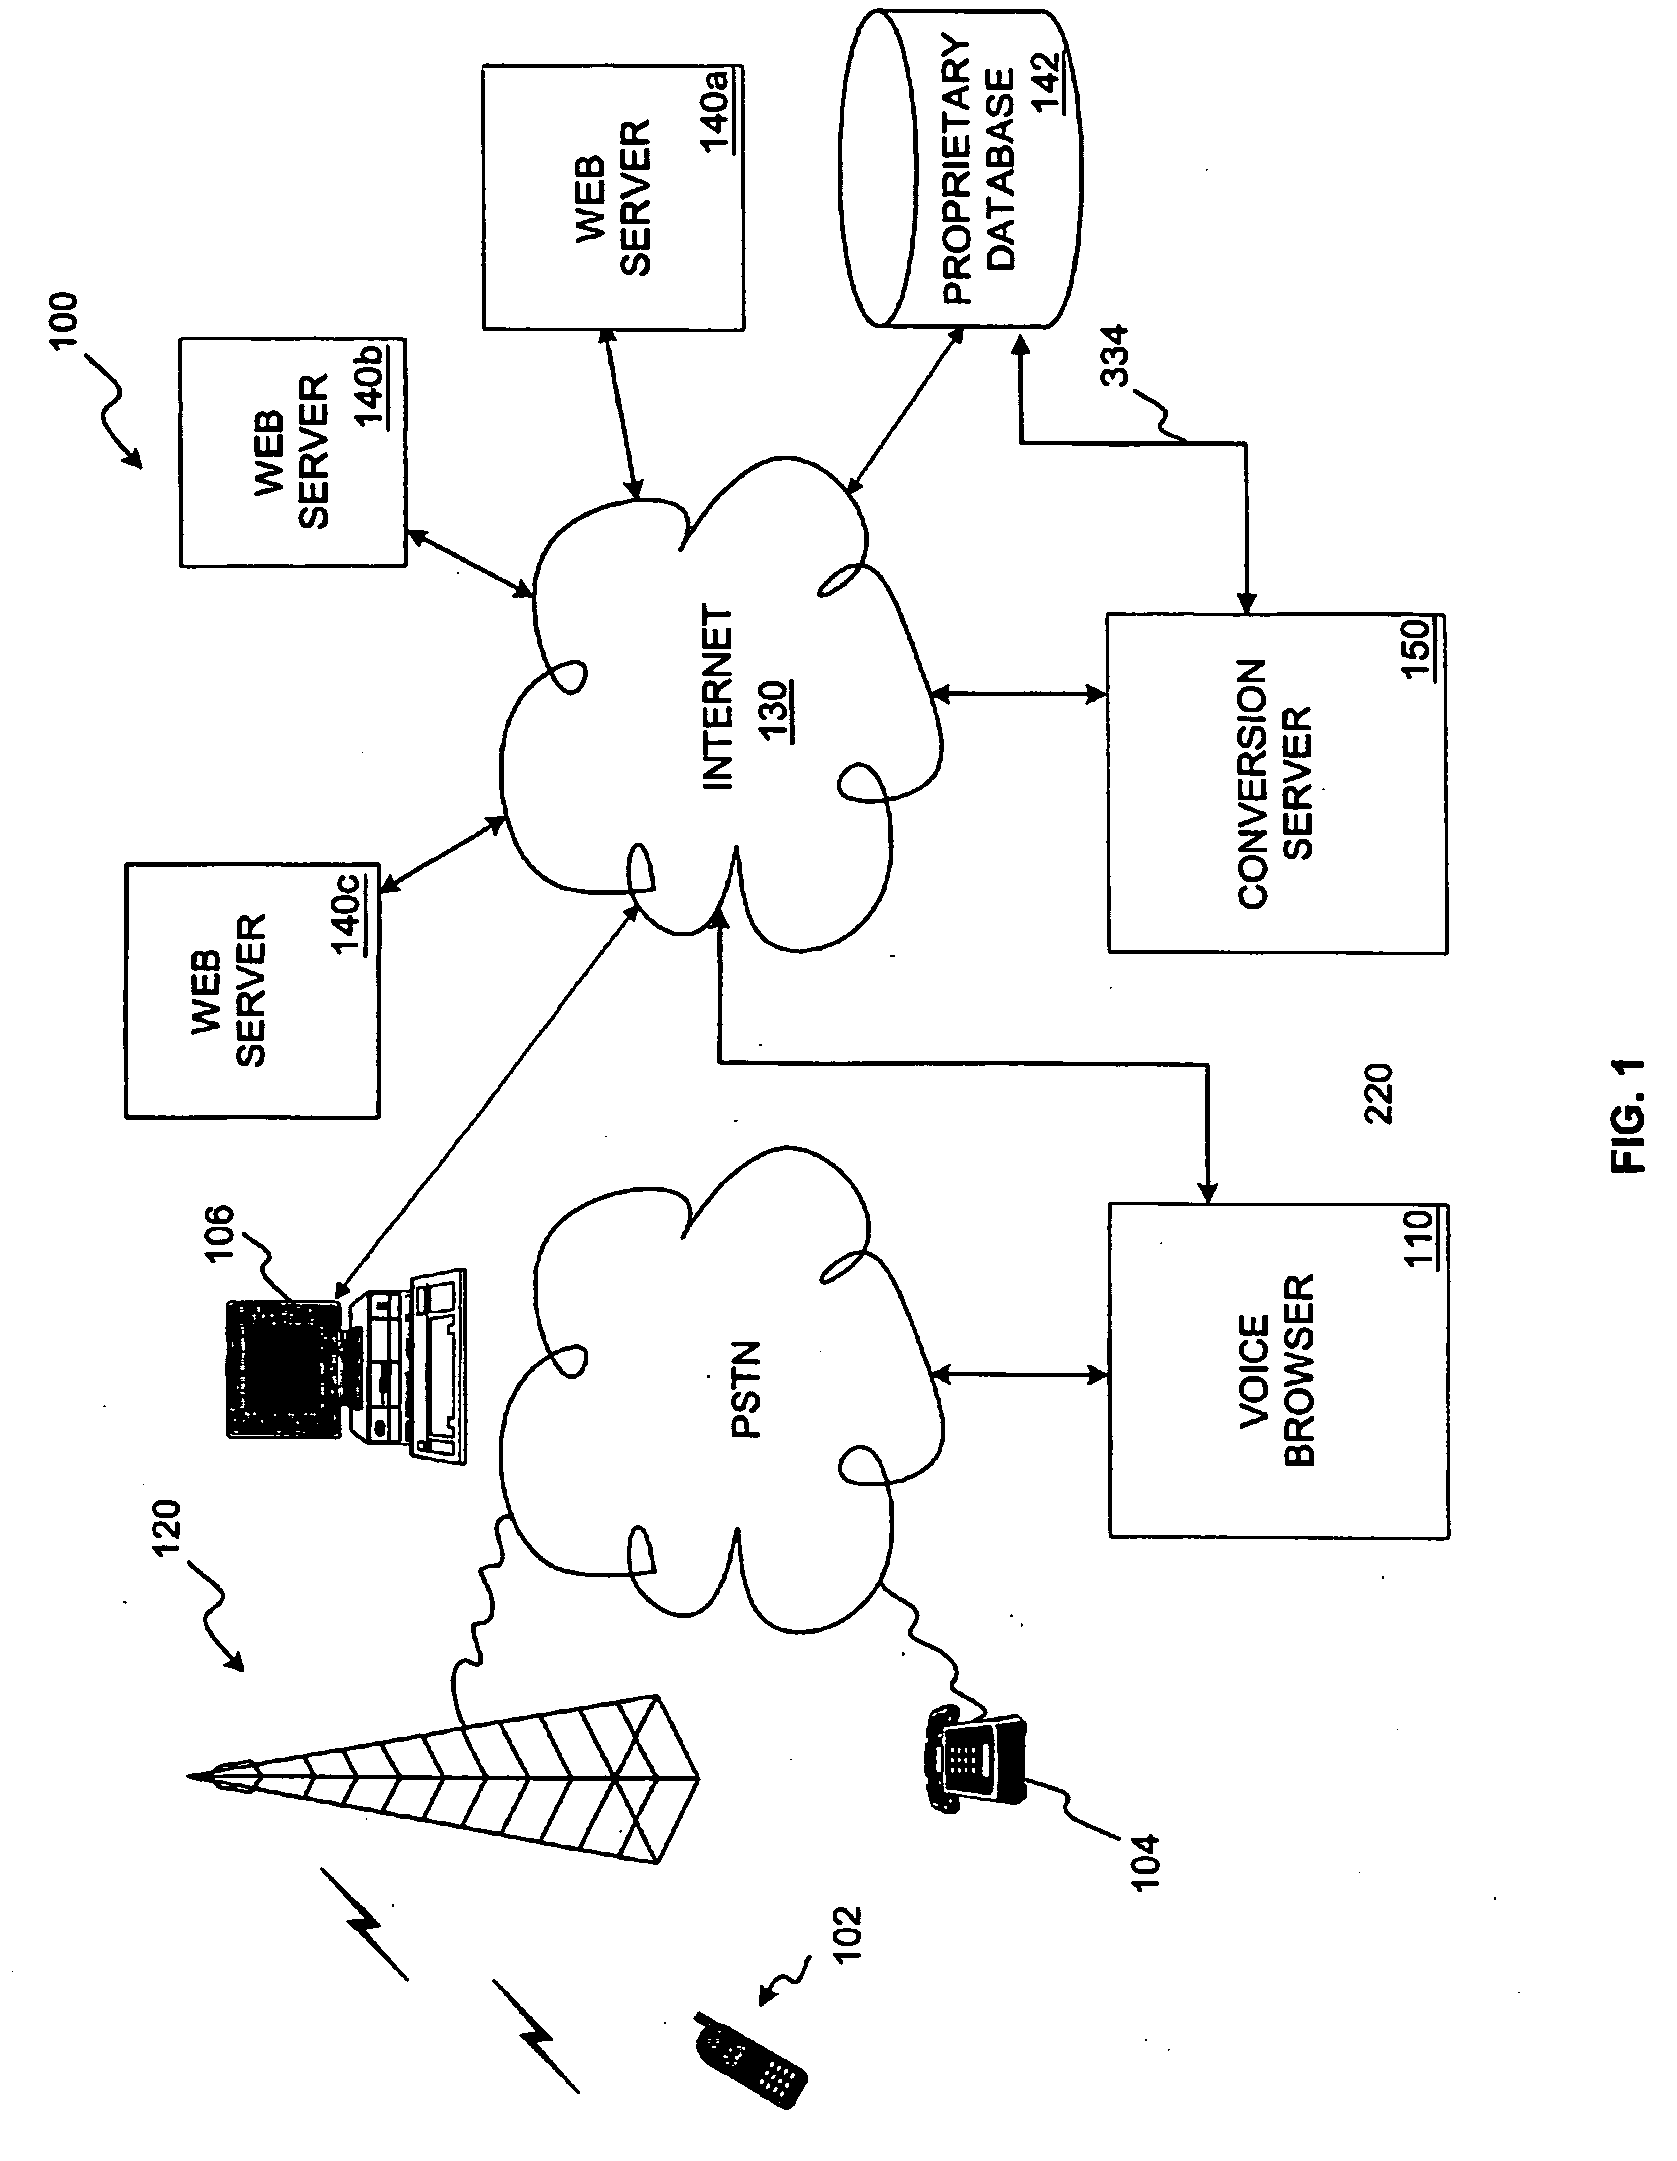 Information retrieval system including voice browser and data conversion server